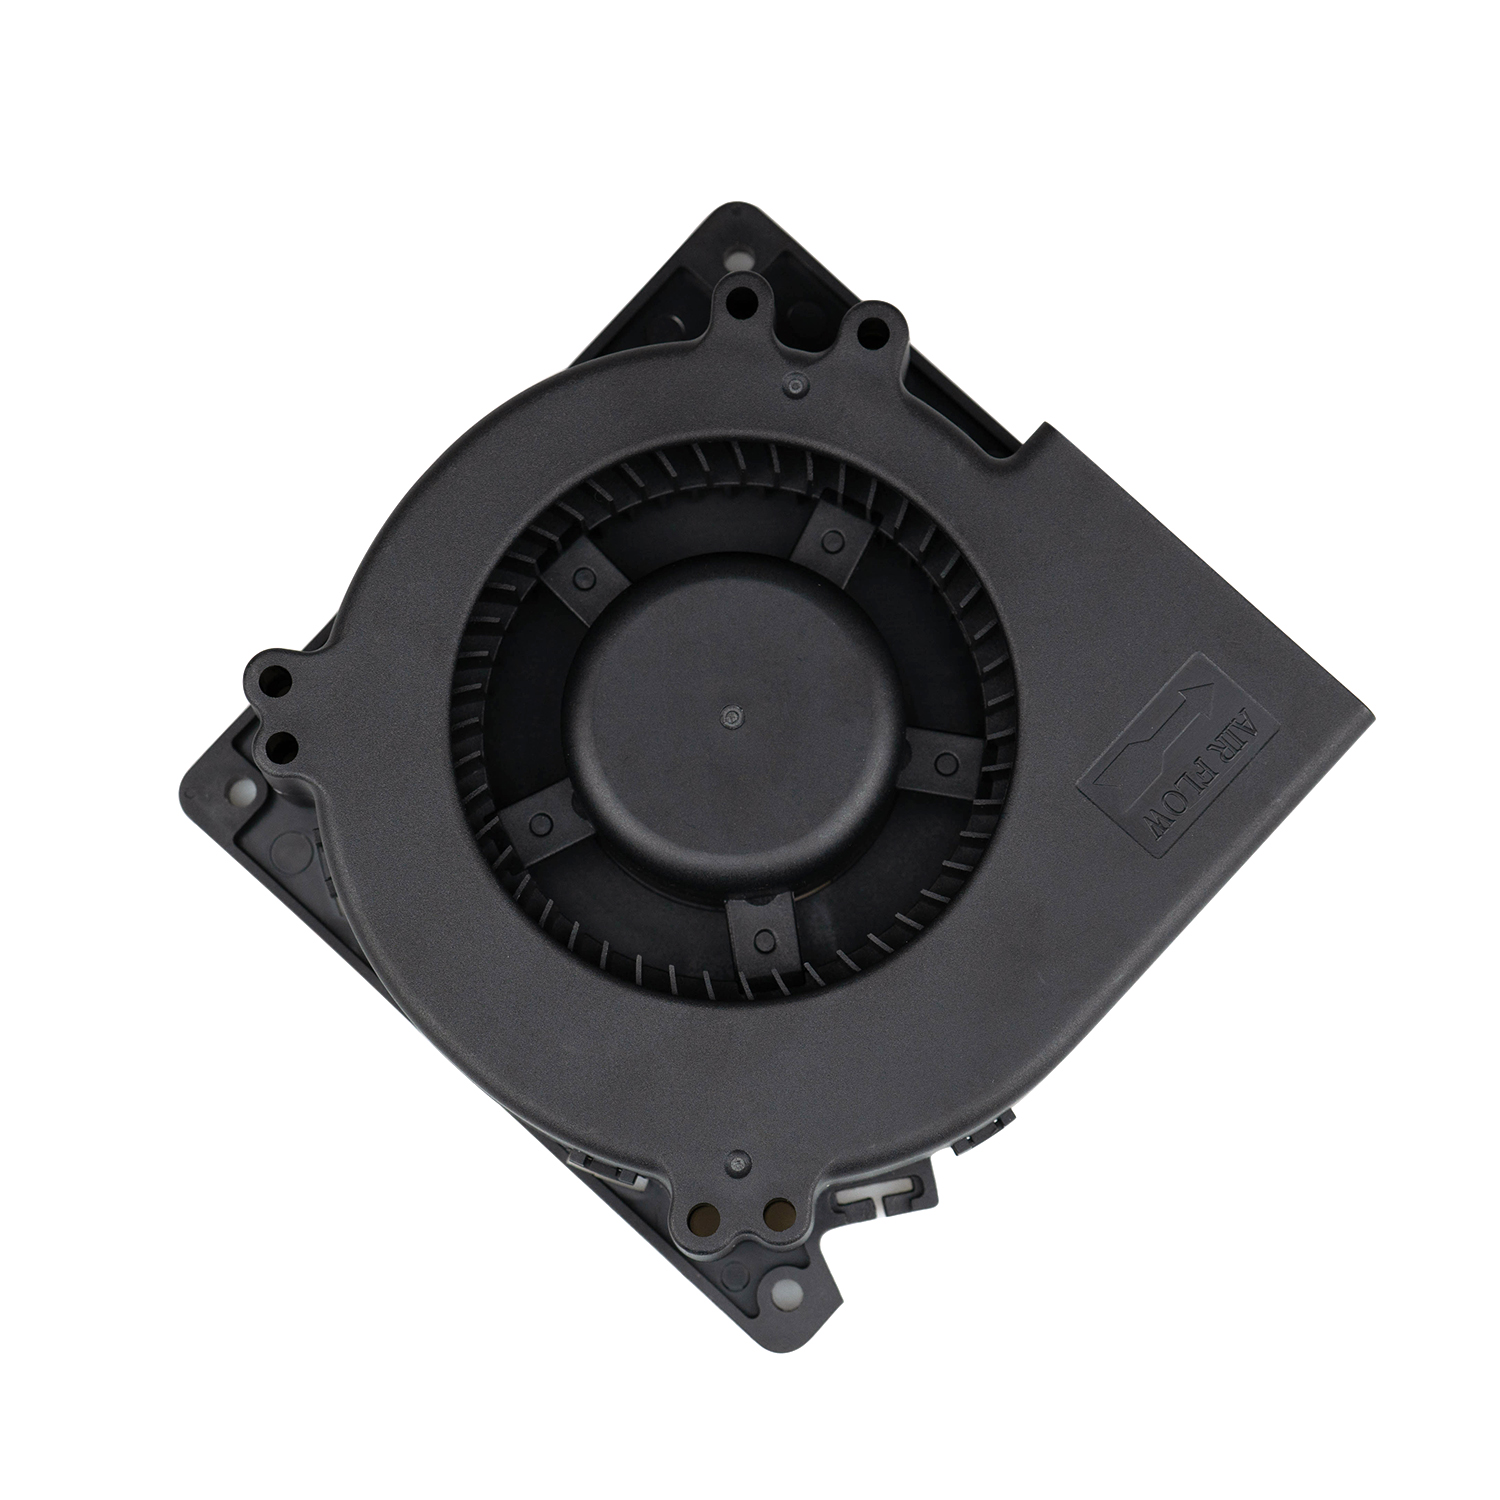 120mm Centrifugal DC Blower For Laptop